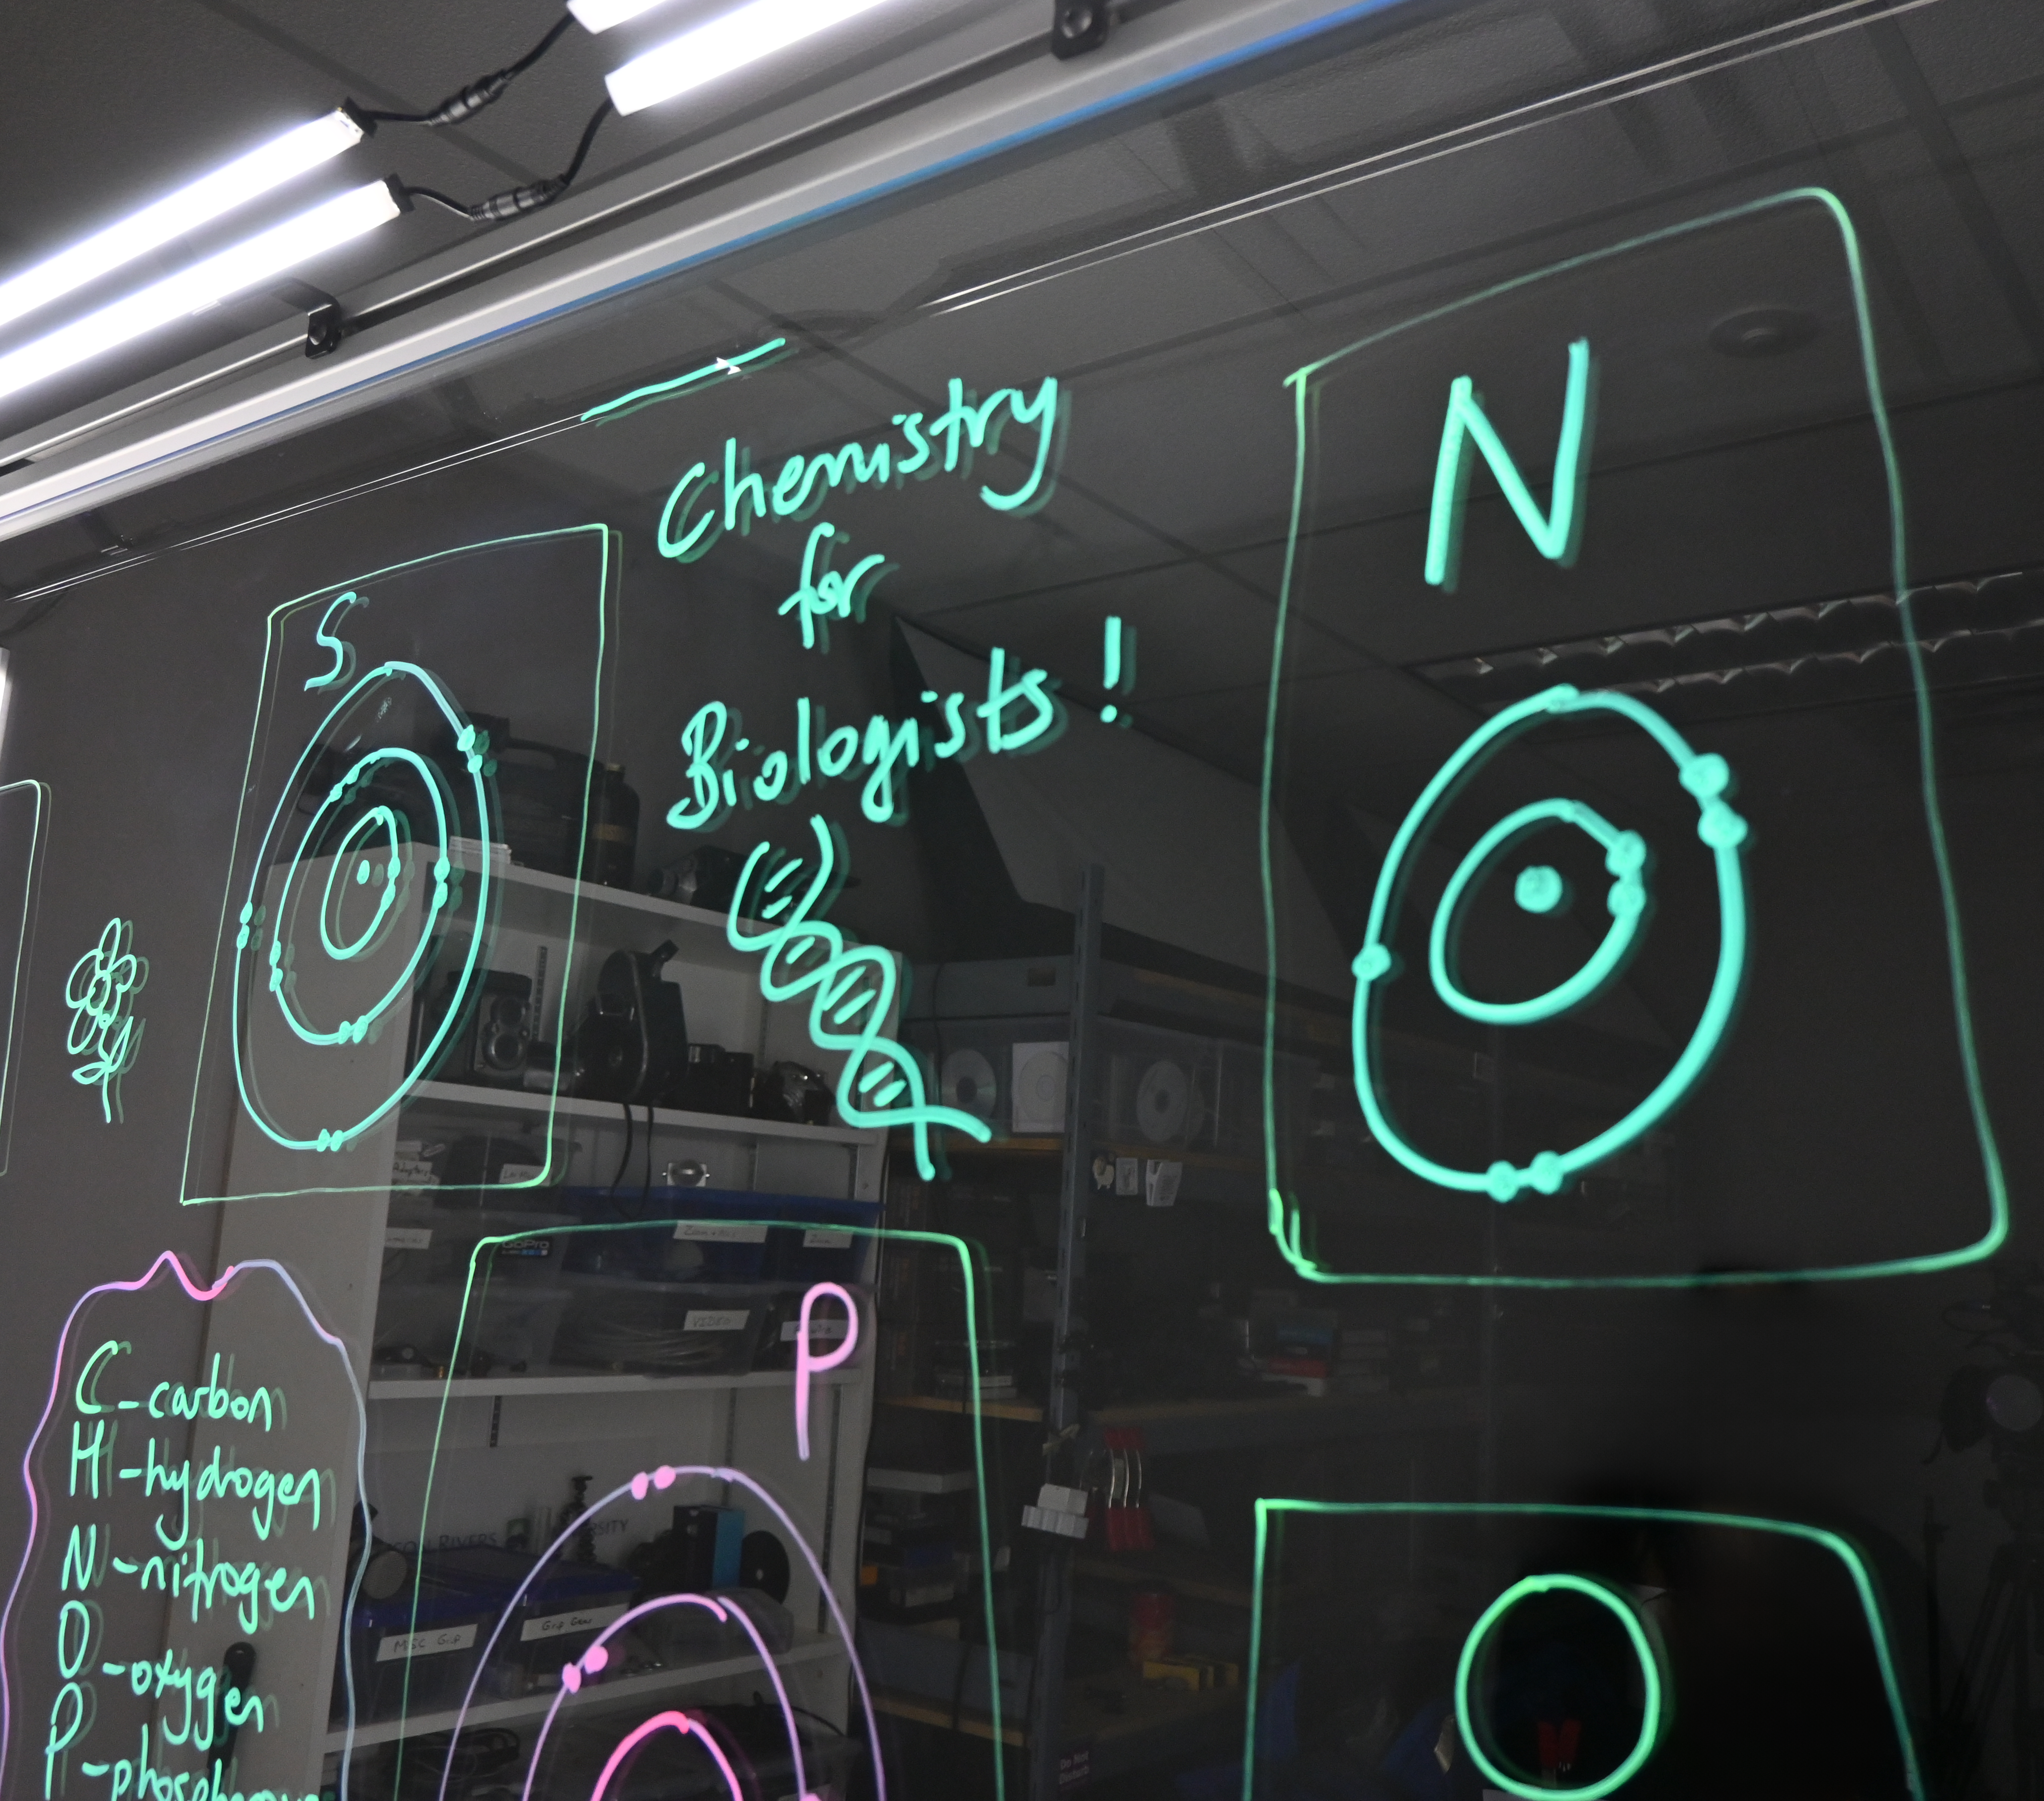 Writing on a light board says 'Chemistry for Biologists' with a double helix below it. Around the writing are Bohr models of sulphur, nitrogen, and phosphorus.